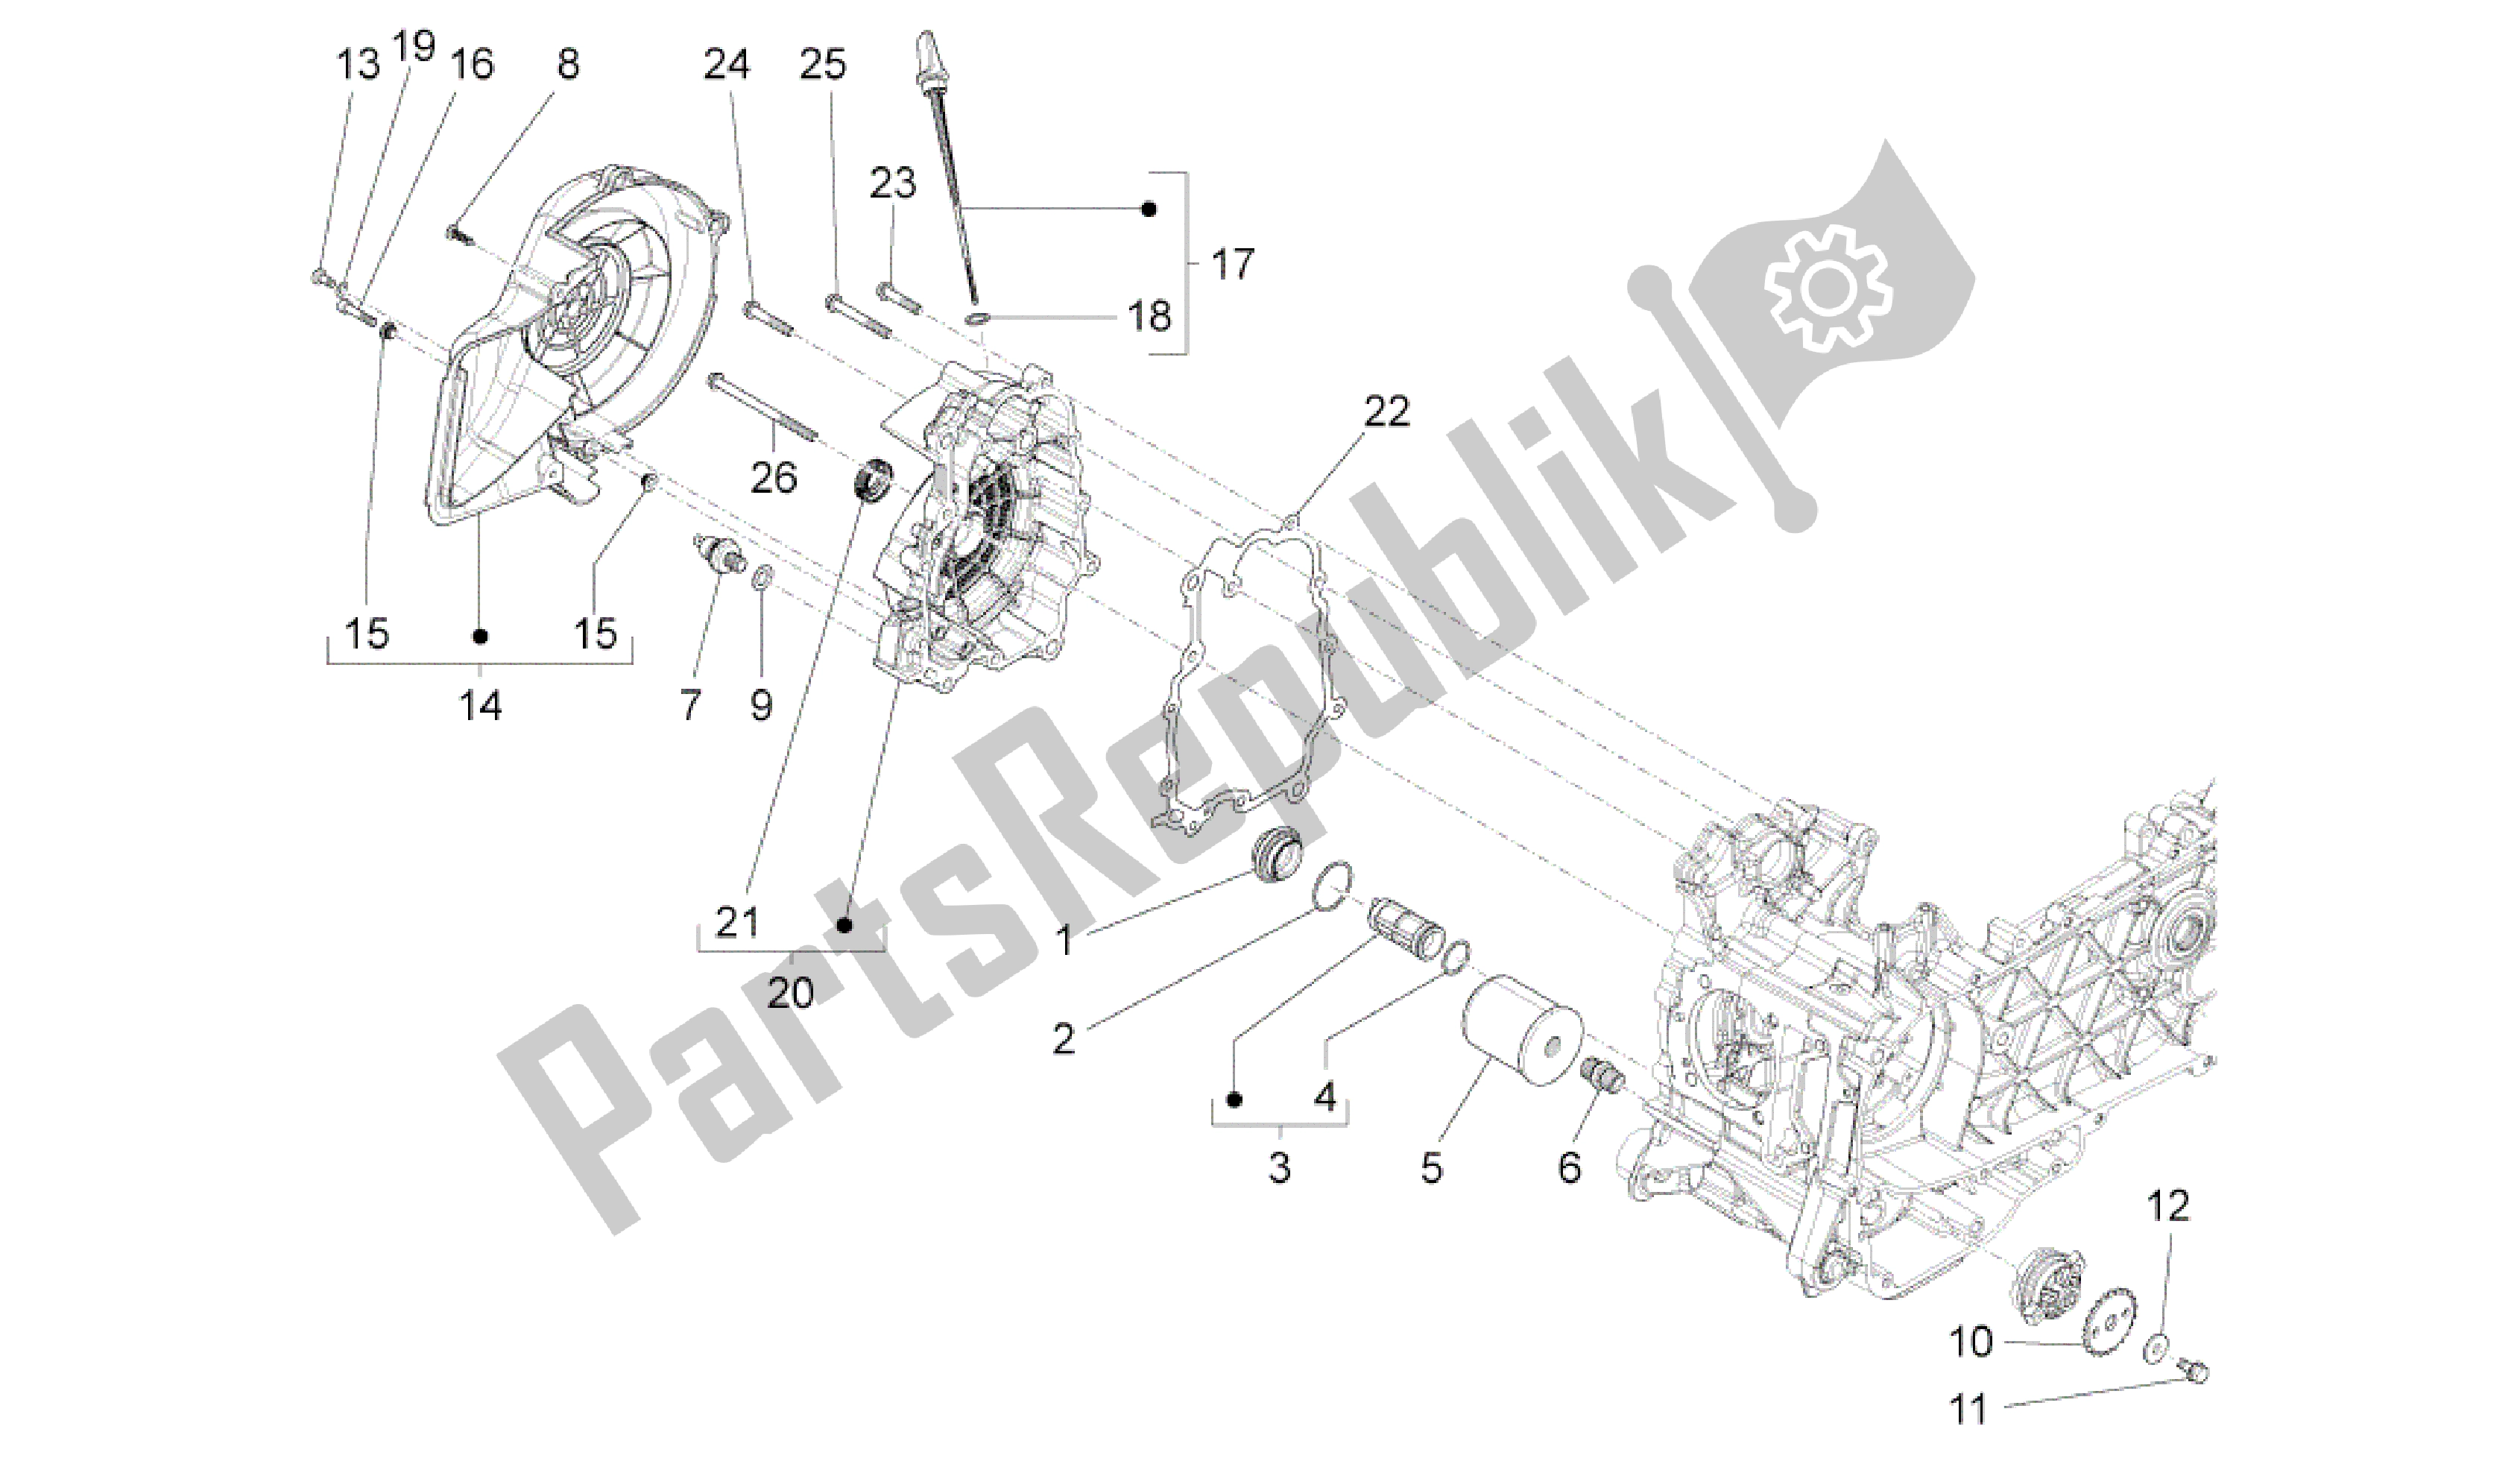 All parts for the Flywheel Magneto Cover - Oil Filter of the Vespa 946 150 2013 - 2014